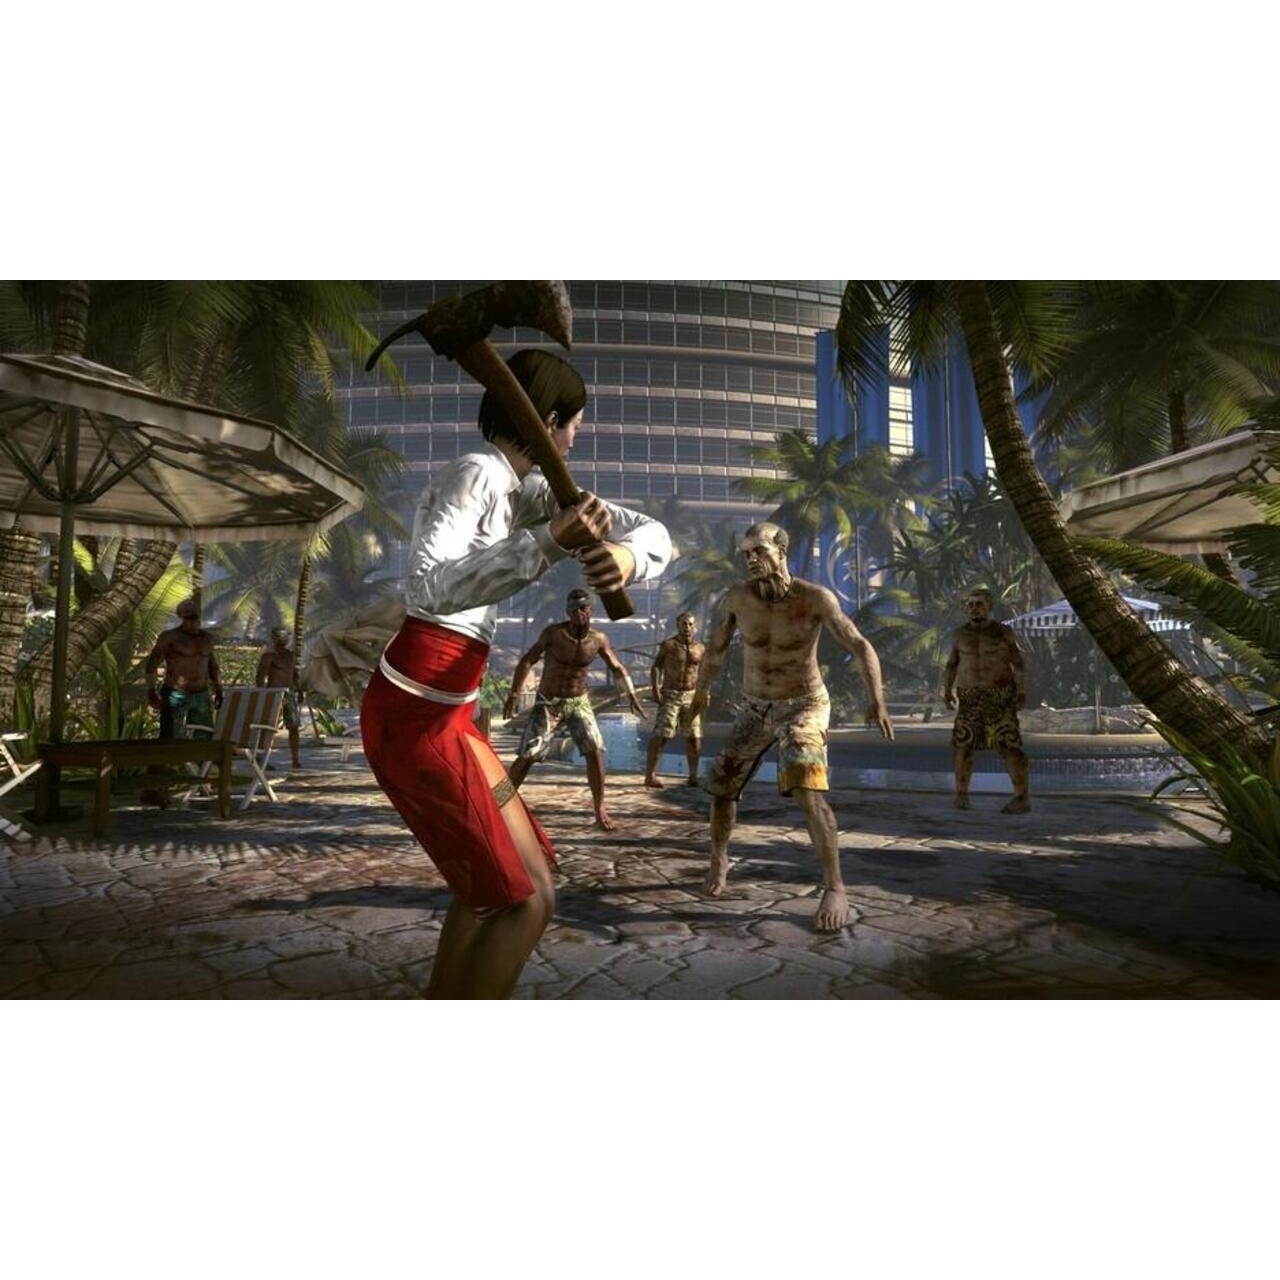 Dead Island (Game of the Year Edition) (Platinum Hits) for Xbox360